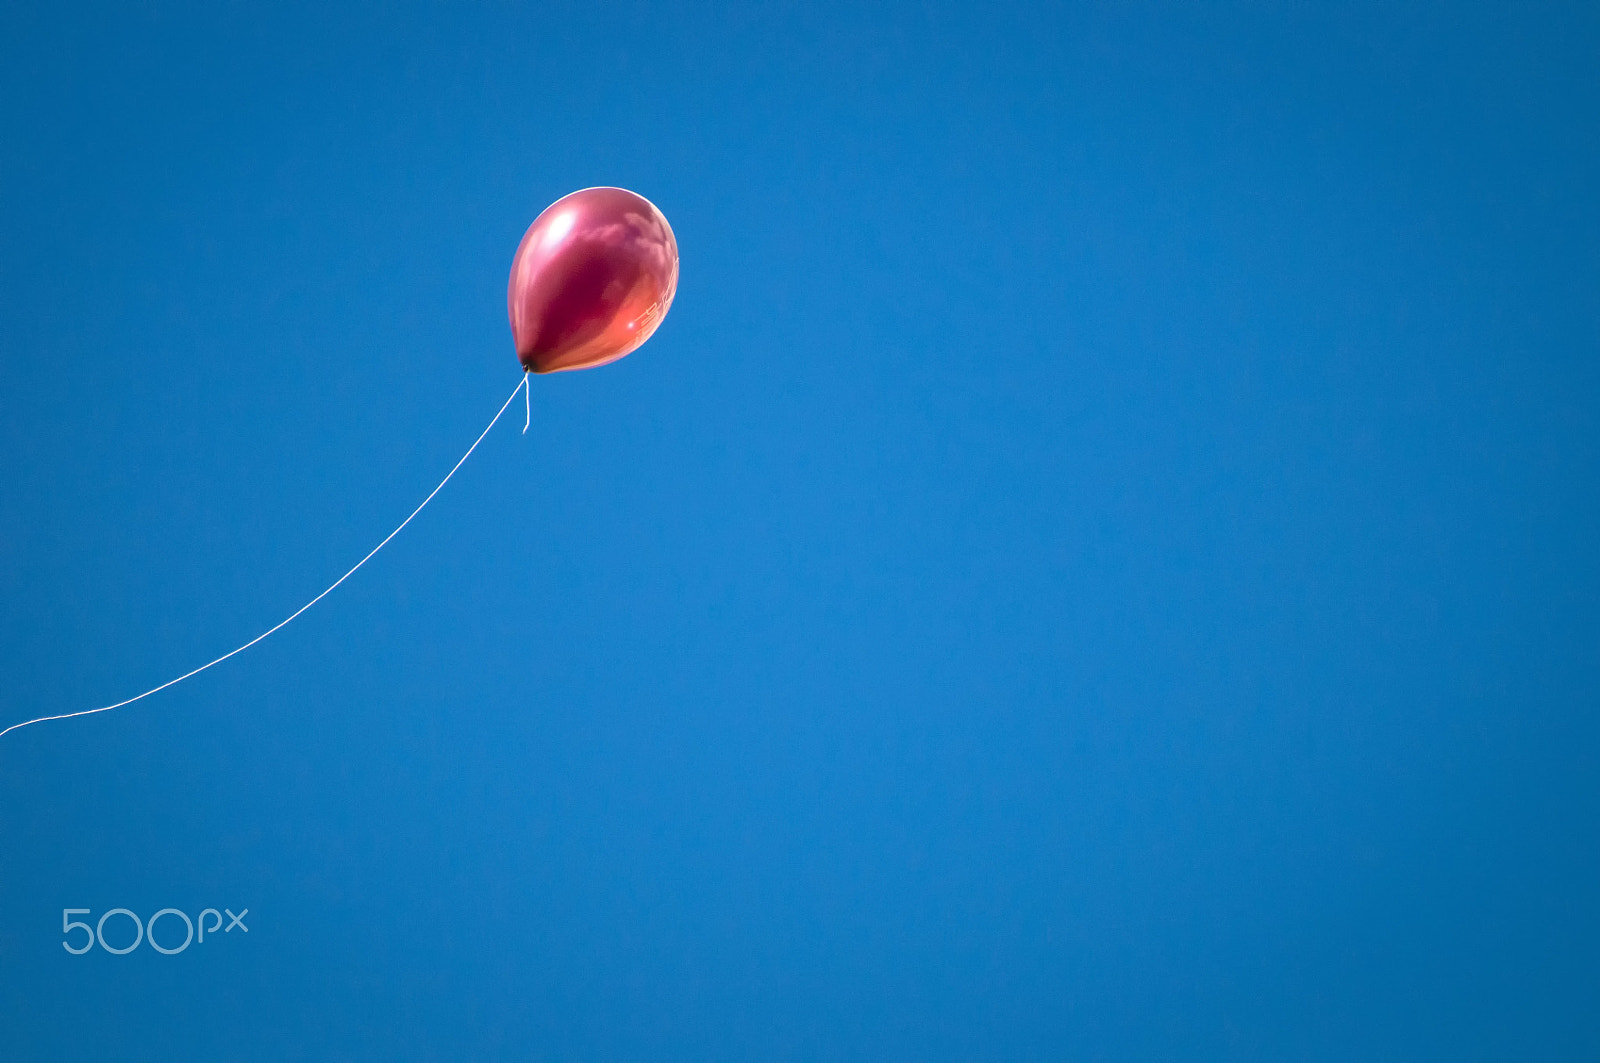 Nikon D300 sample photo. Red balloon flying under a blue sky. photography